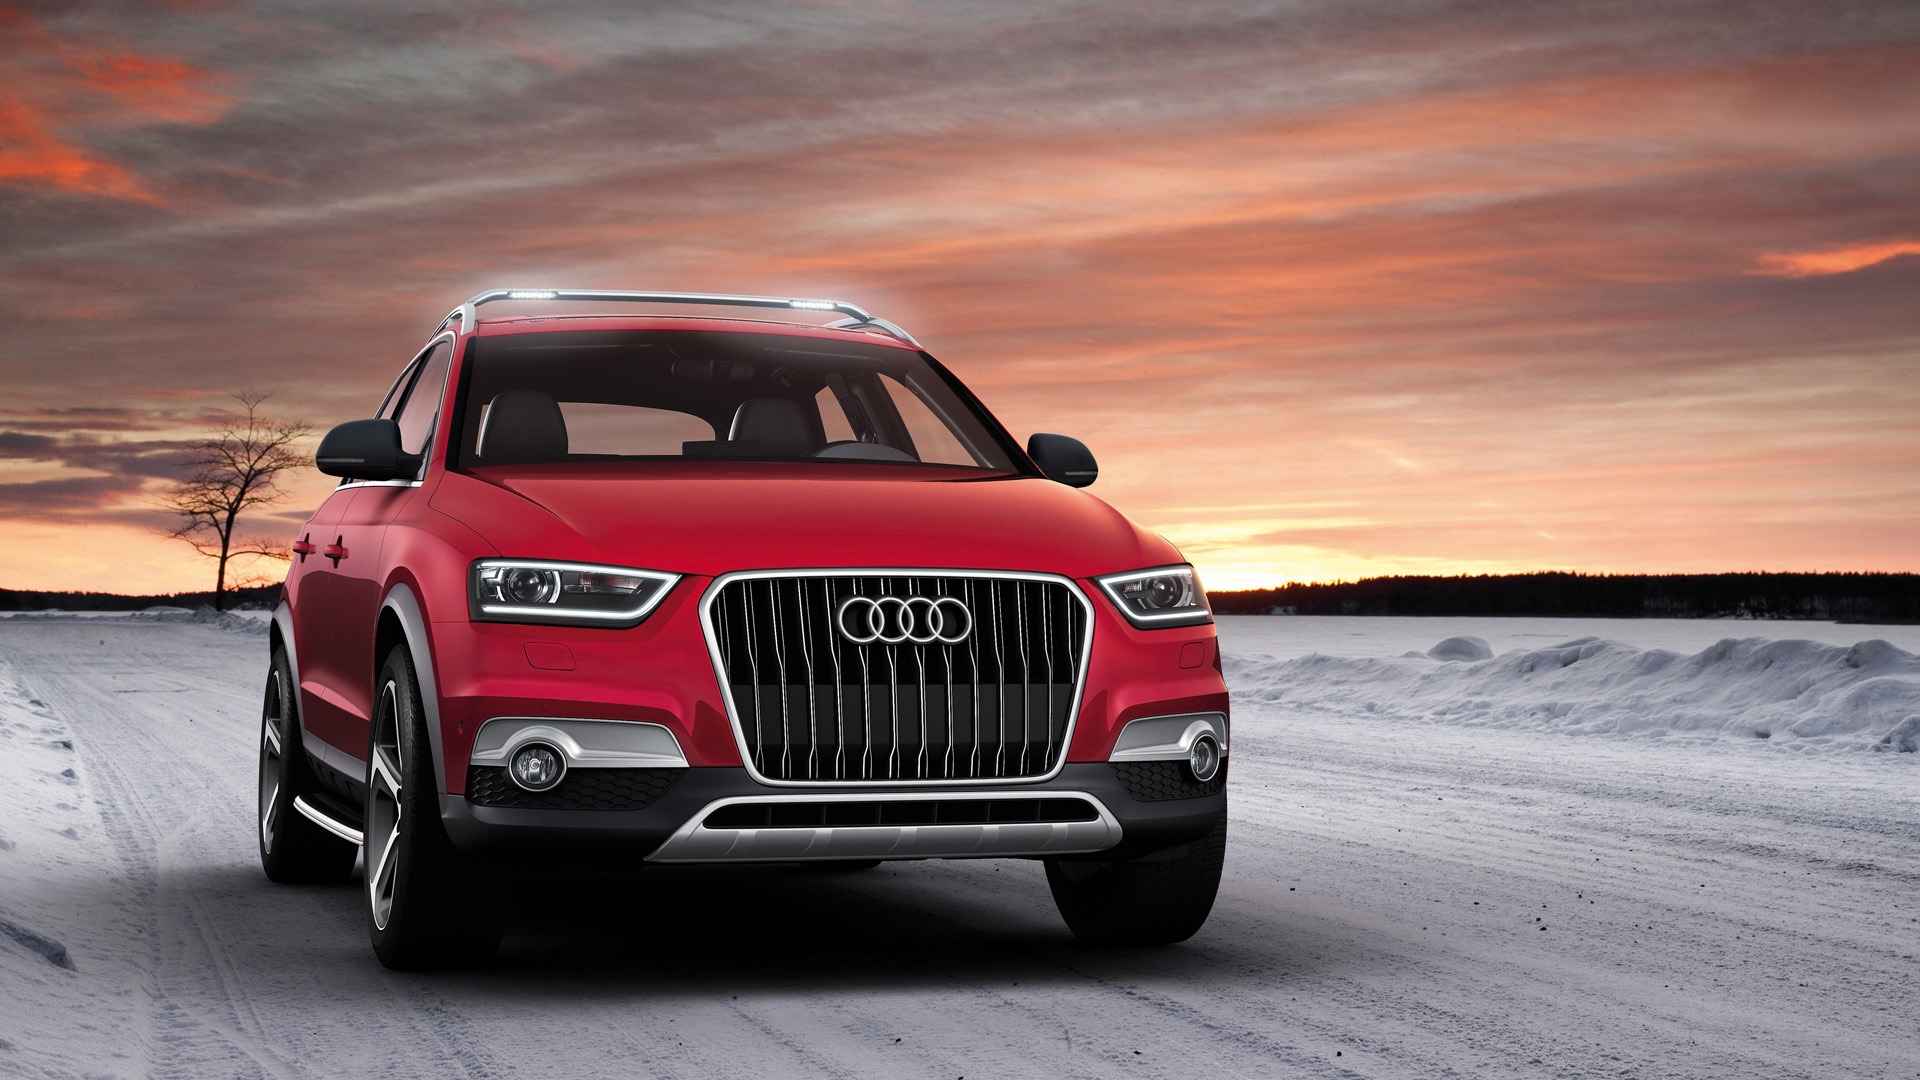 2012 Audi Q3 Vail Front for 1920 x 1080 HDTV 1080p resolution